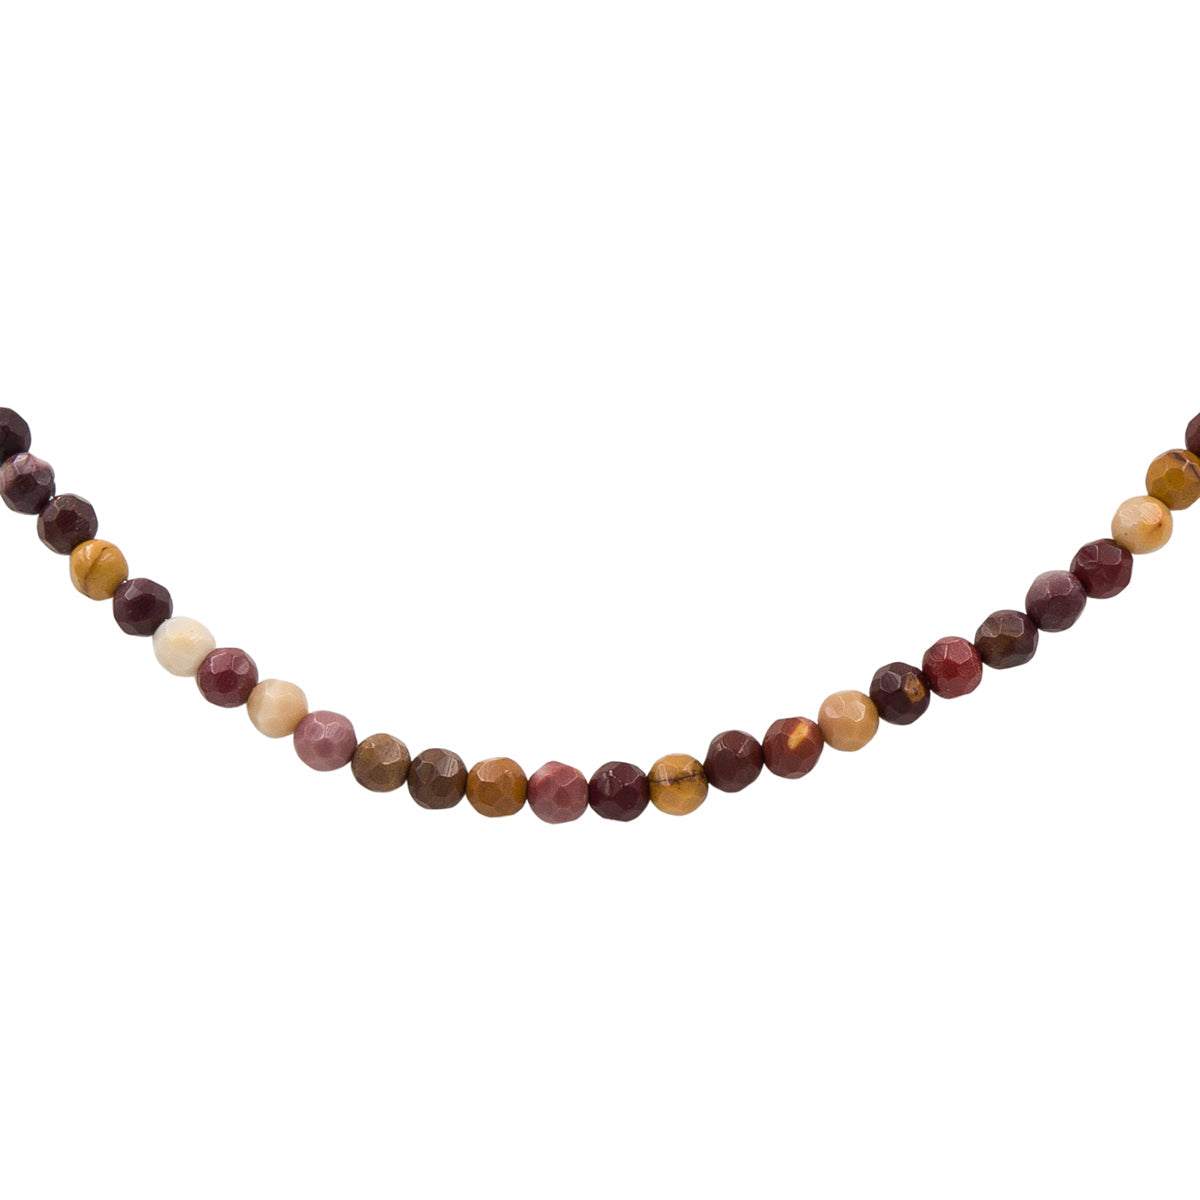 Handmade Mookaite Sterling Silver Necklace | Adjustable Length | Eco-Friendly Jewelry